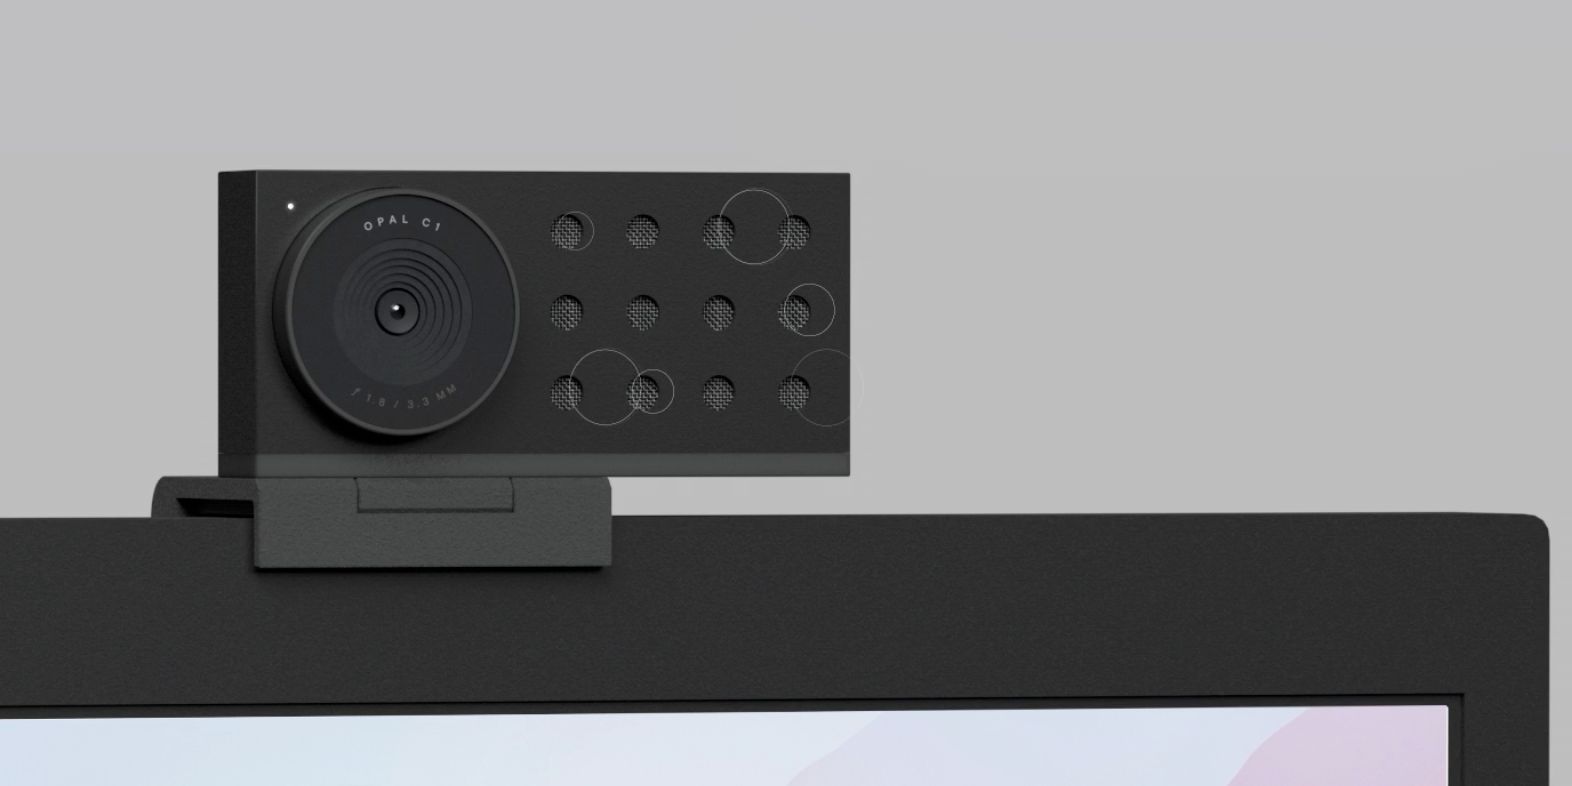 Stop Using Your DSLR Camera As A Webcam And Buy The Opal C1 Instead